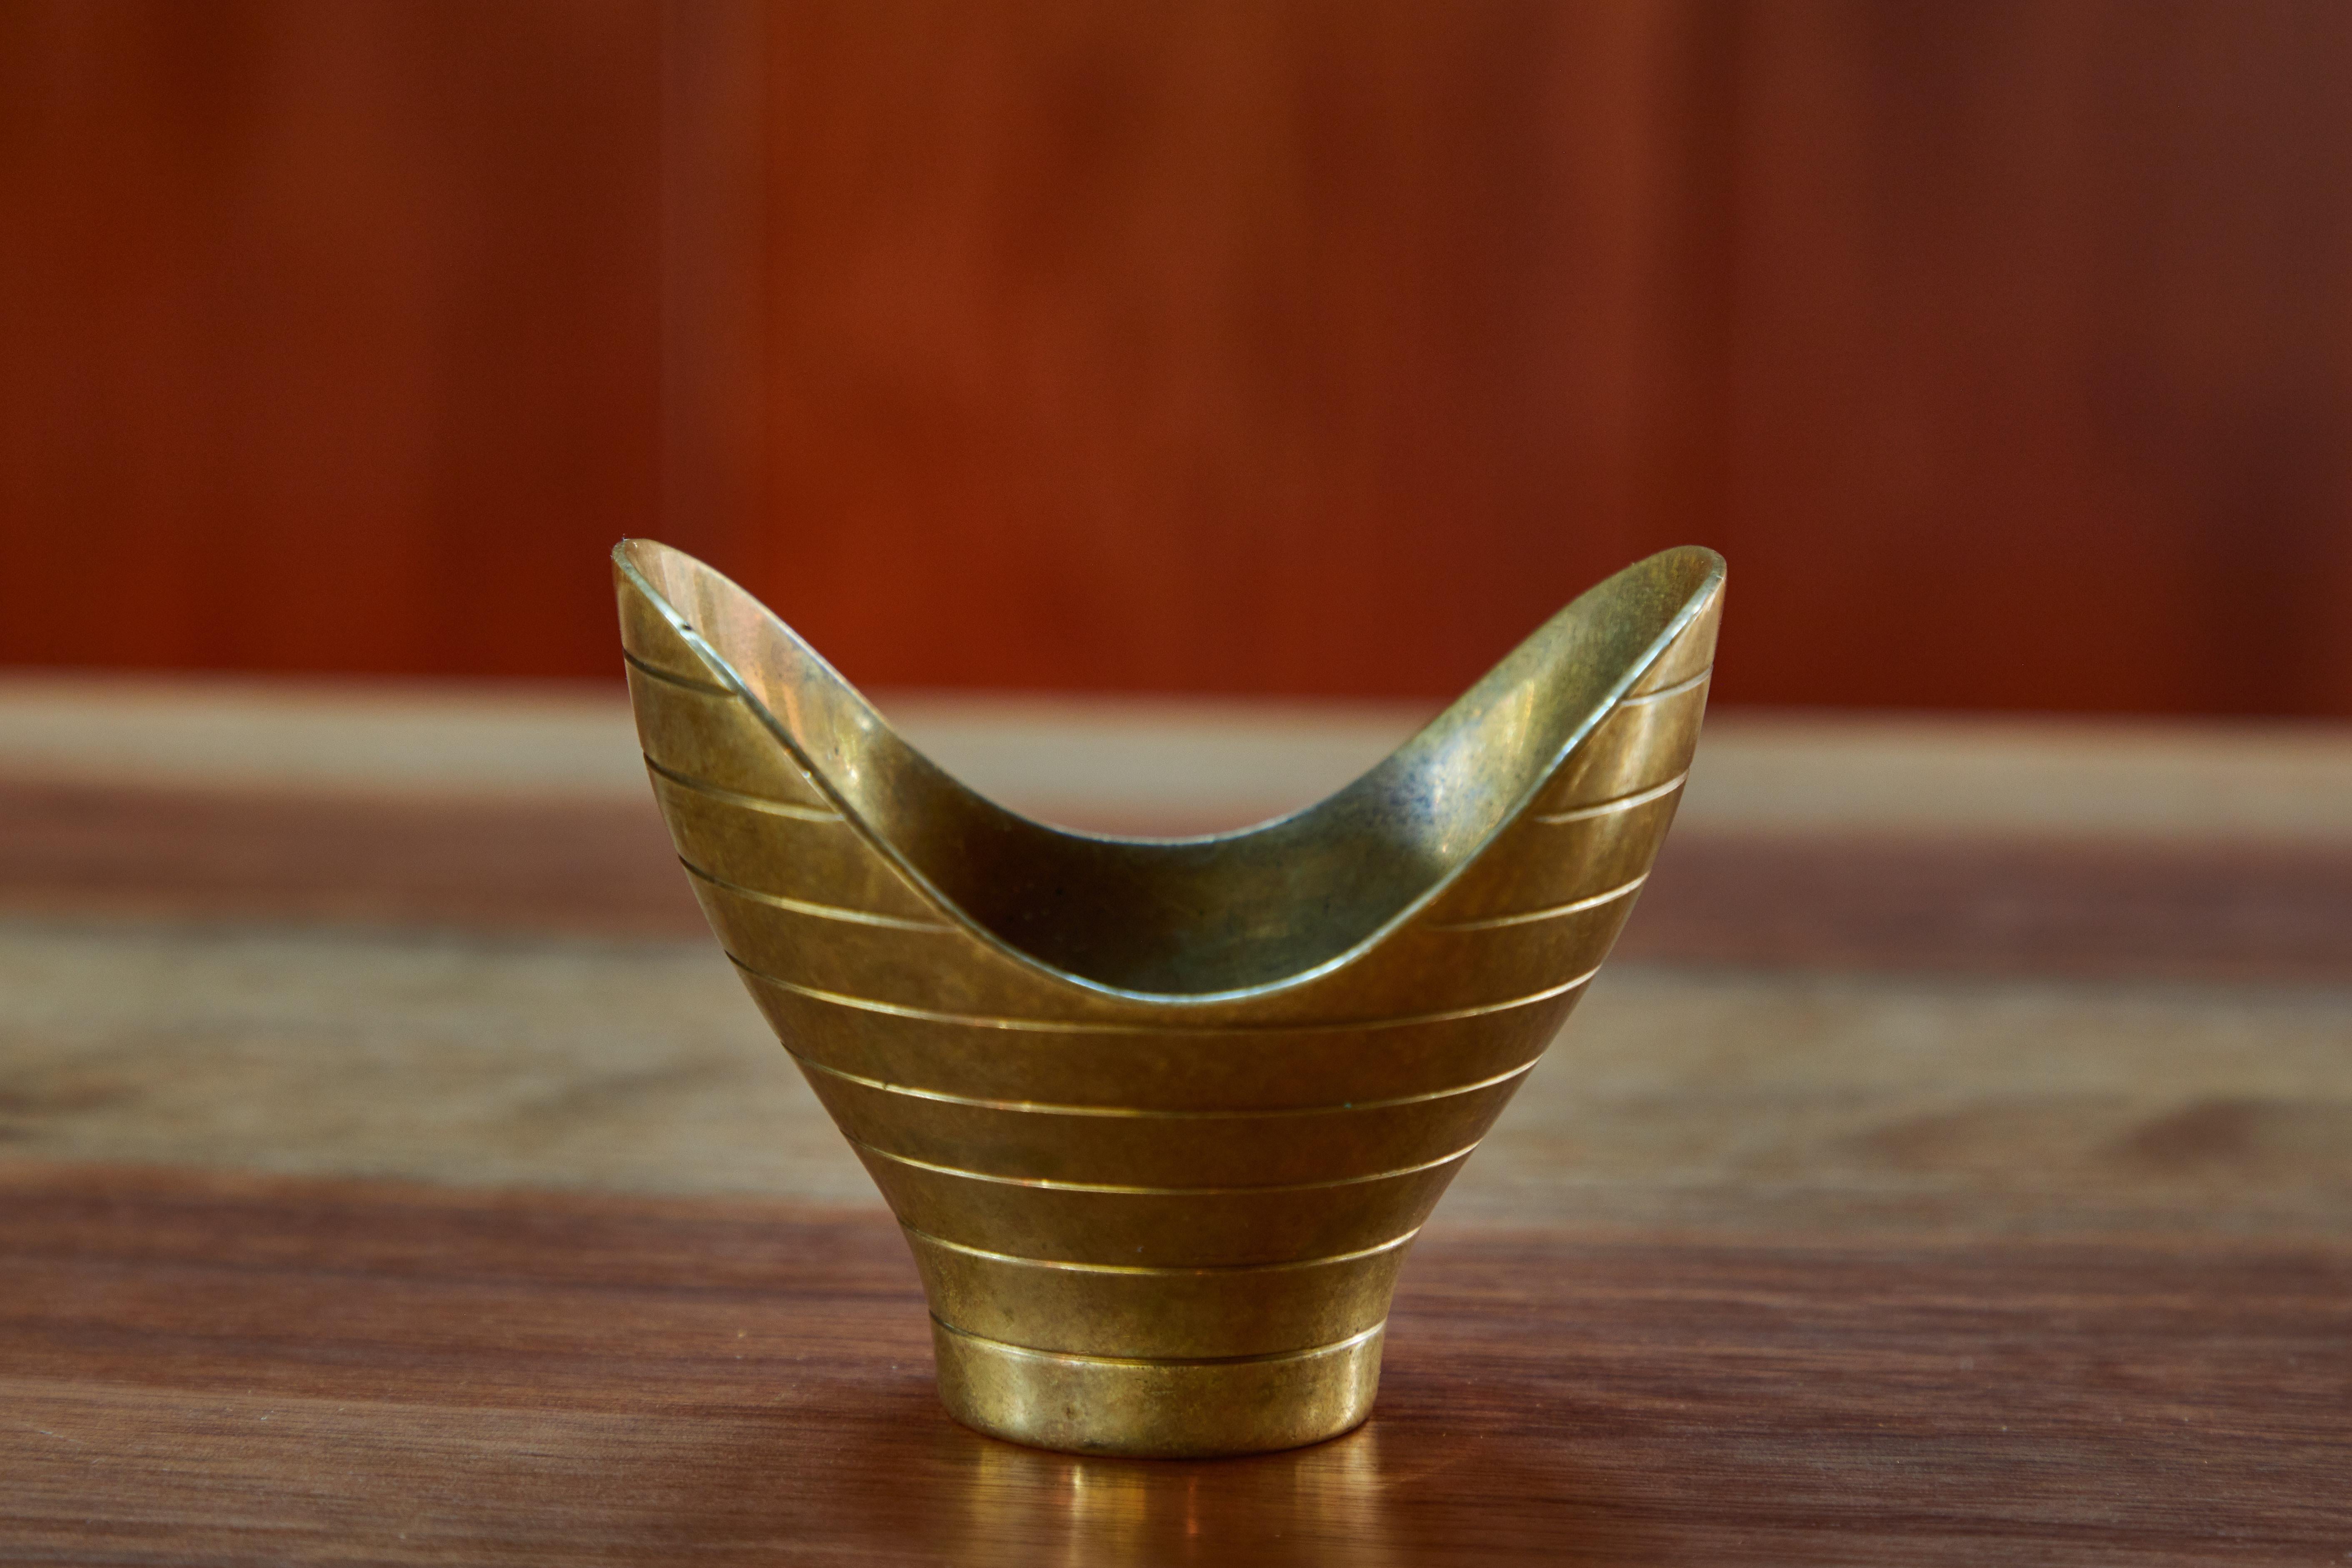 Rare 1950s Paavo Tynell Model AB-9Anamorphic brass bowl for Taito Oy. Executed in solid and lovely patinated brass. Manufactured by Taito Oy in the late 1940s or early 1950s, this is a fine example of a Tynell's iconic design. 

The undisputed